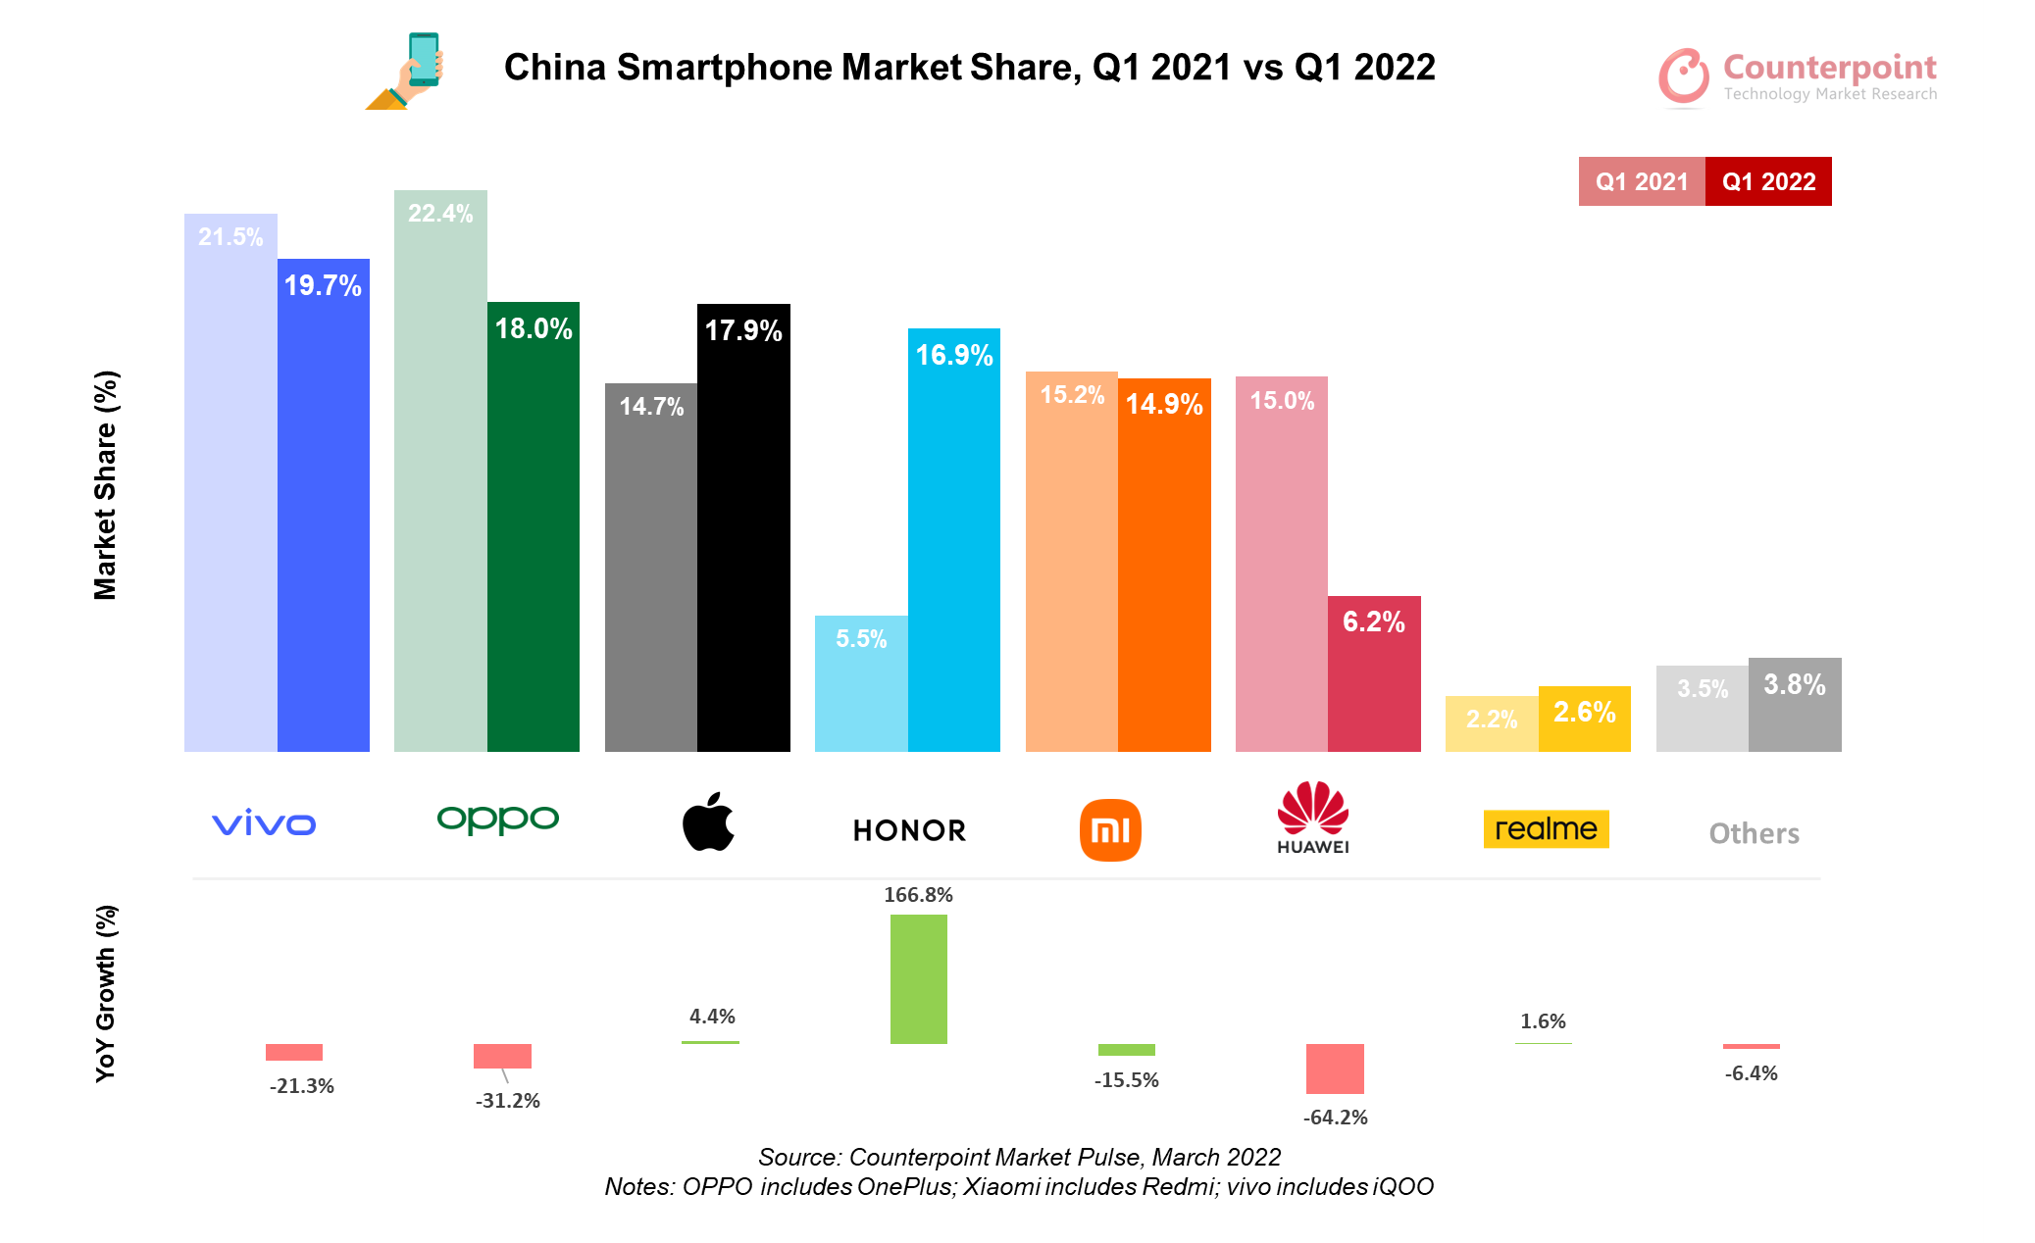 Counterpoint Research China Smartphone Market Share, Q1 2021 vs Q1 2022